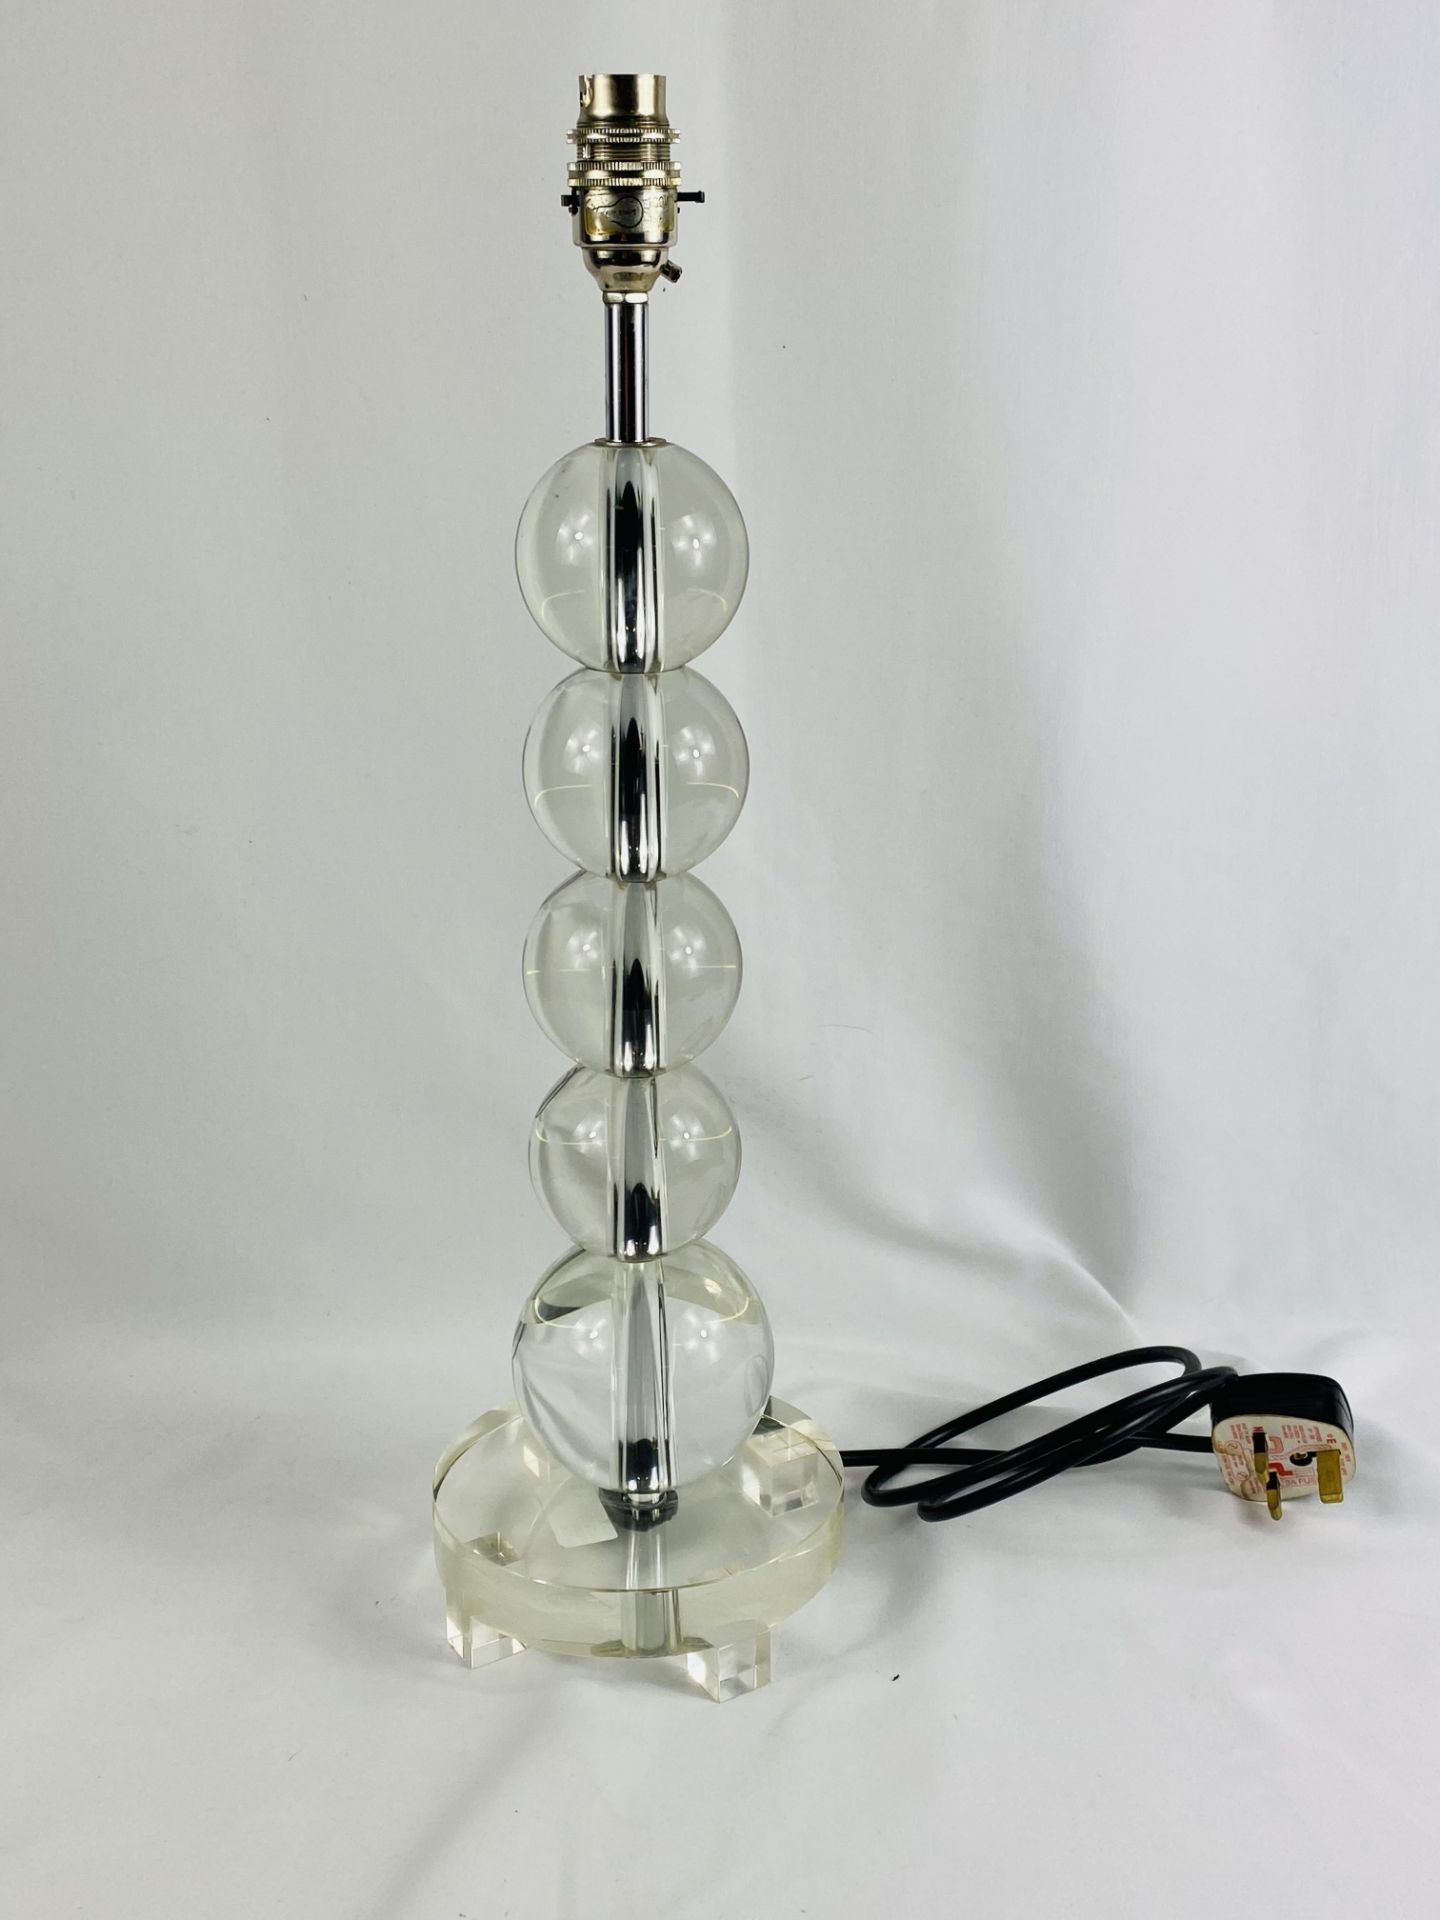 Contemporary glass and chrome table lamp - Image 5 of 5